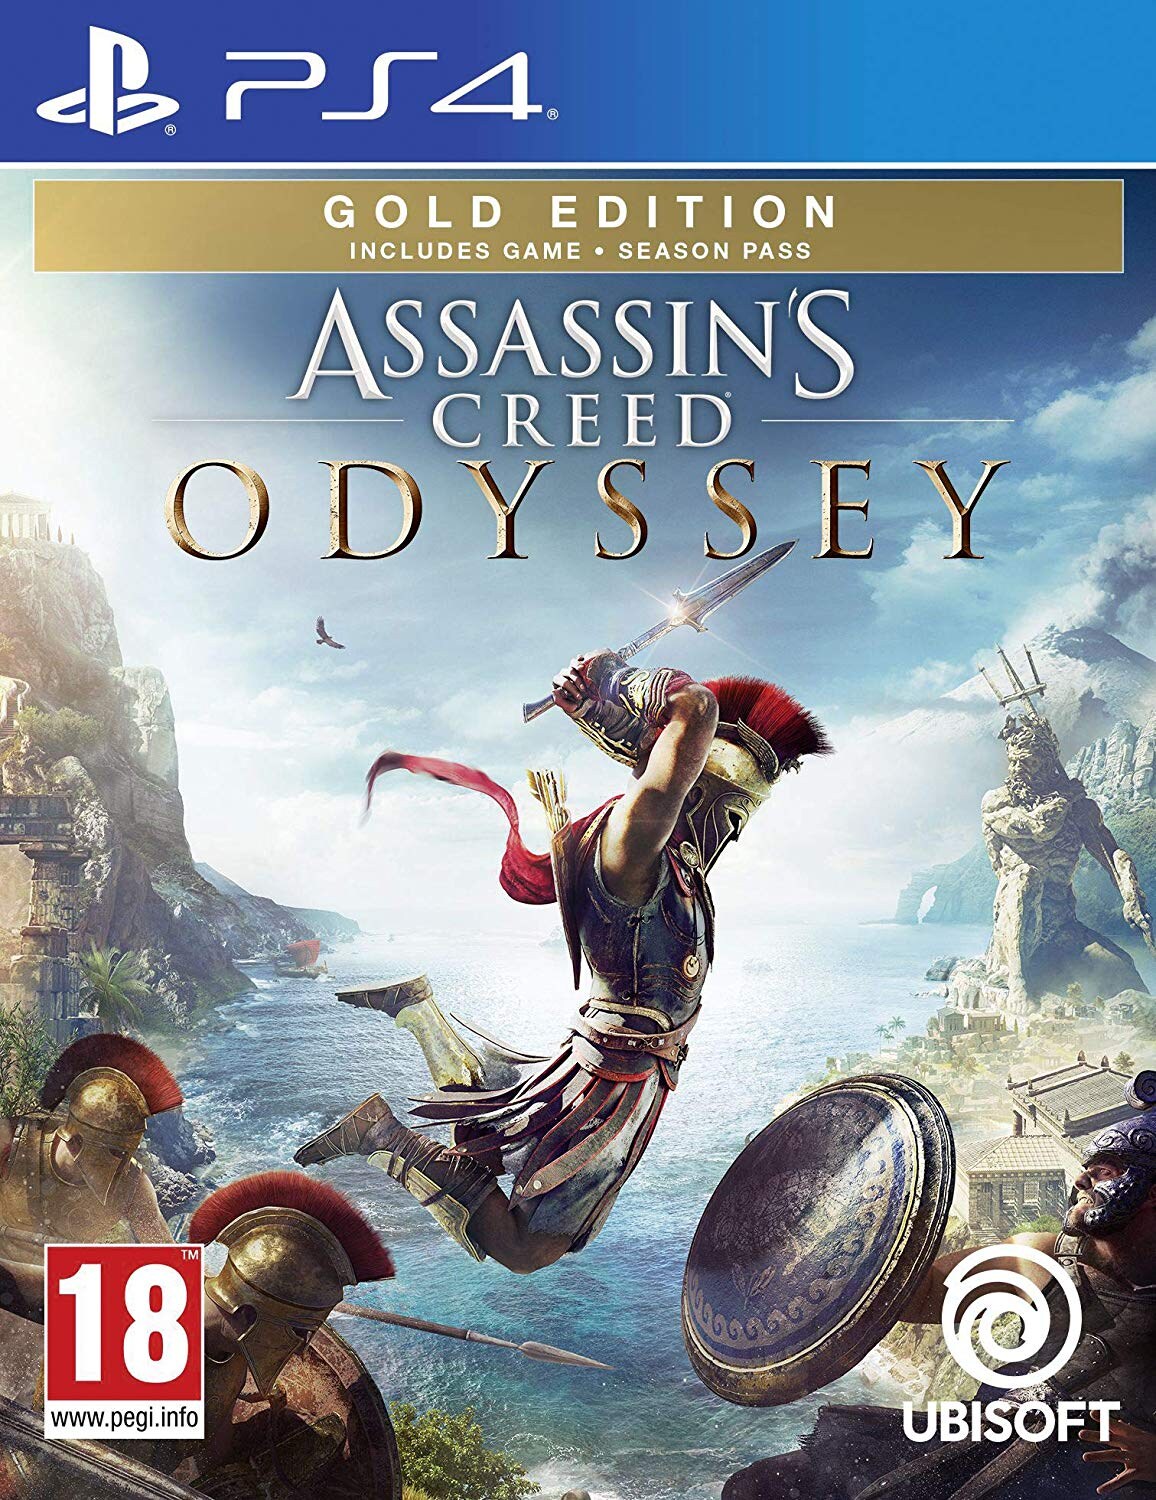 assassin's creed odyssey ps4 price